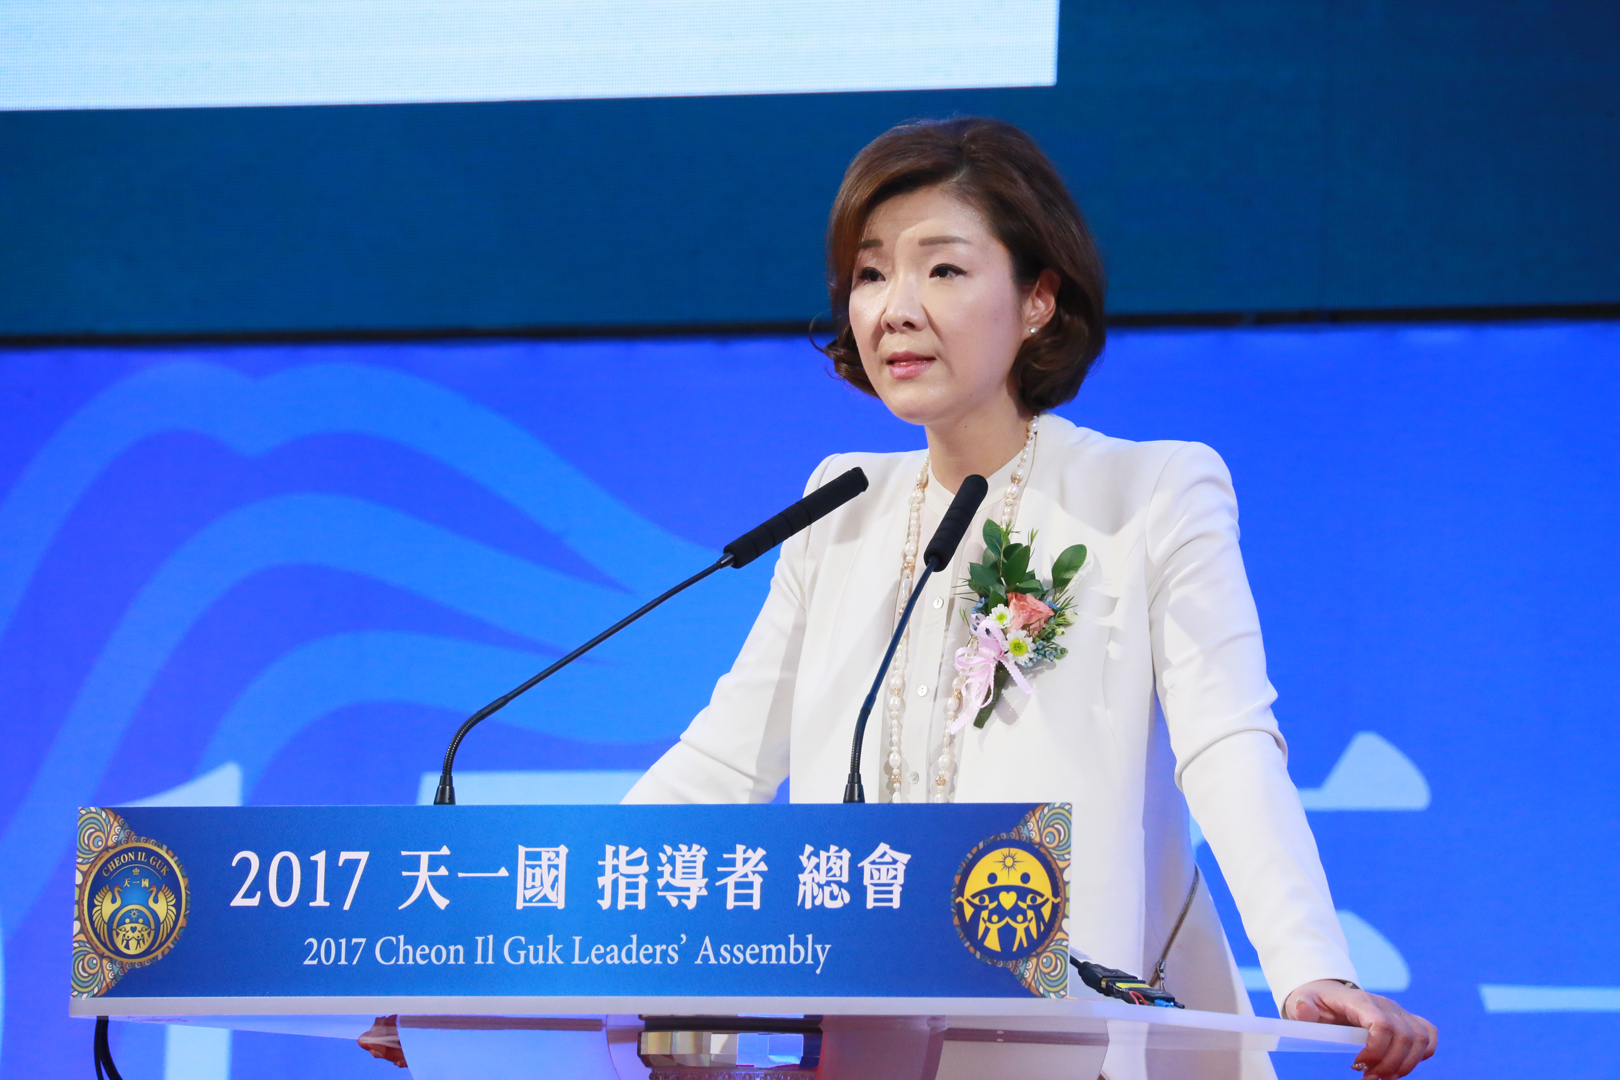 2017 Cheon Il Guk Leaders’ Assembly Opening Ceremony (September 9)